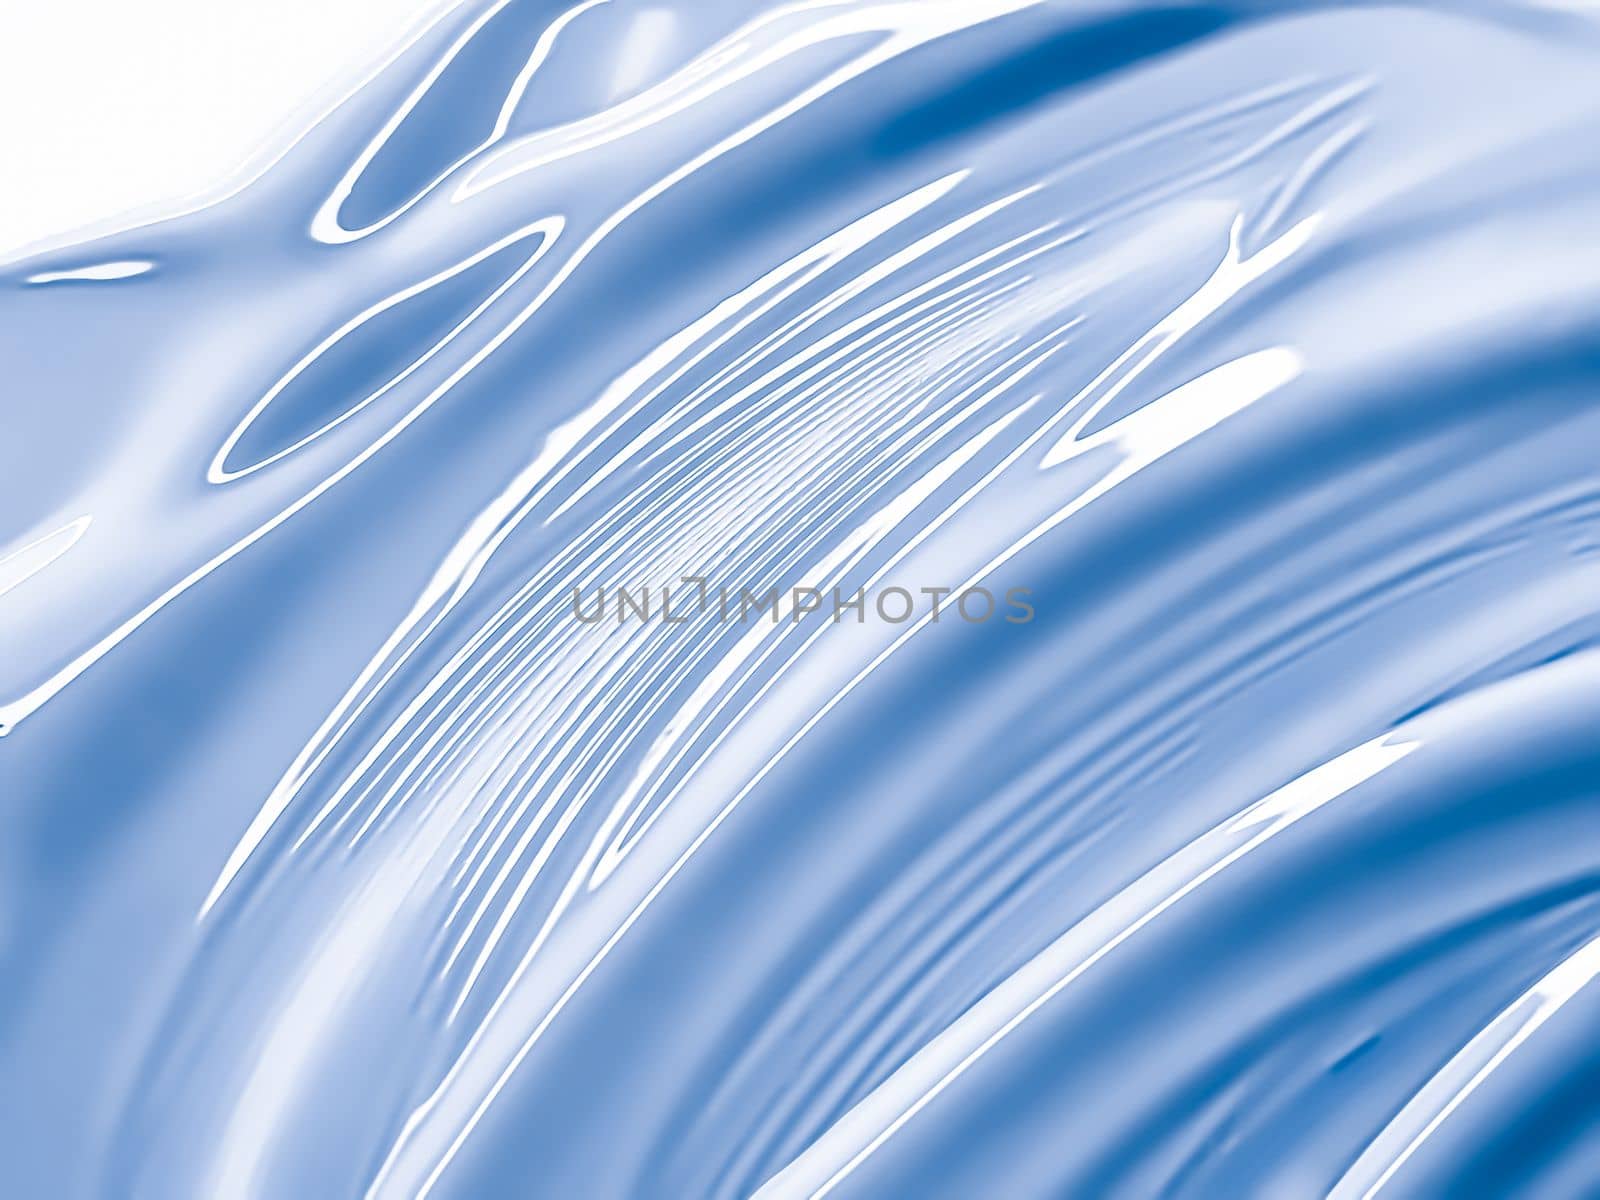 Glossy blue cosmetic texture as beauty make-up product background, cosmetics and luxury makeup brand design by Anneleven